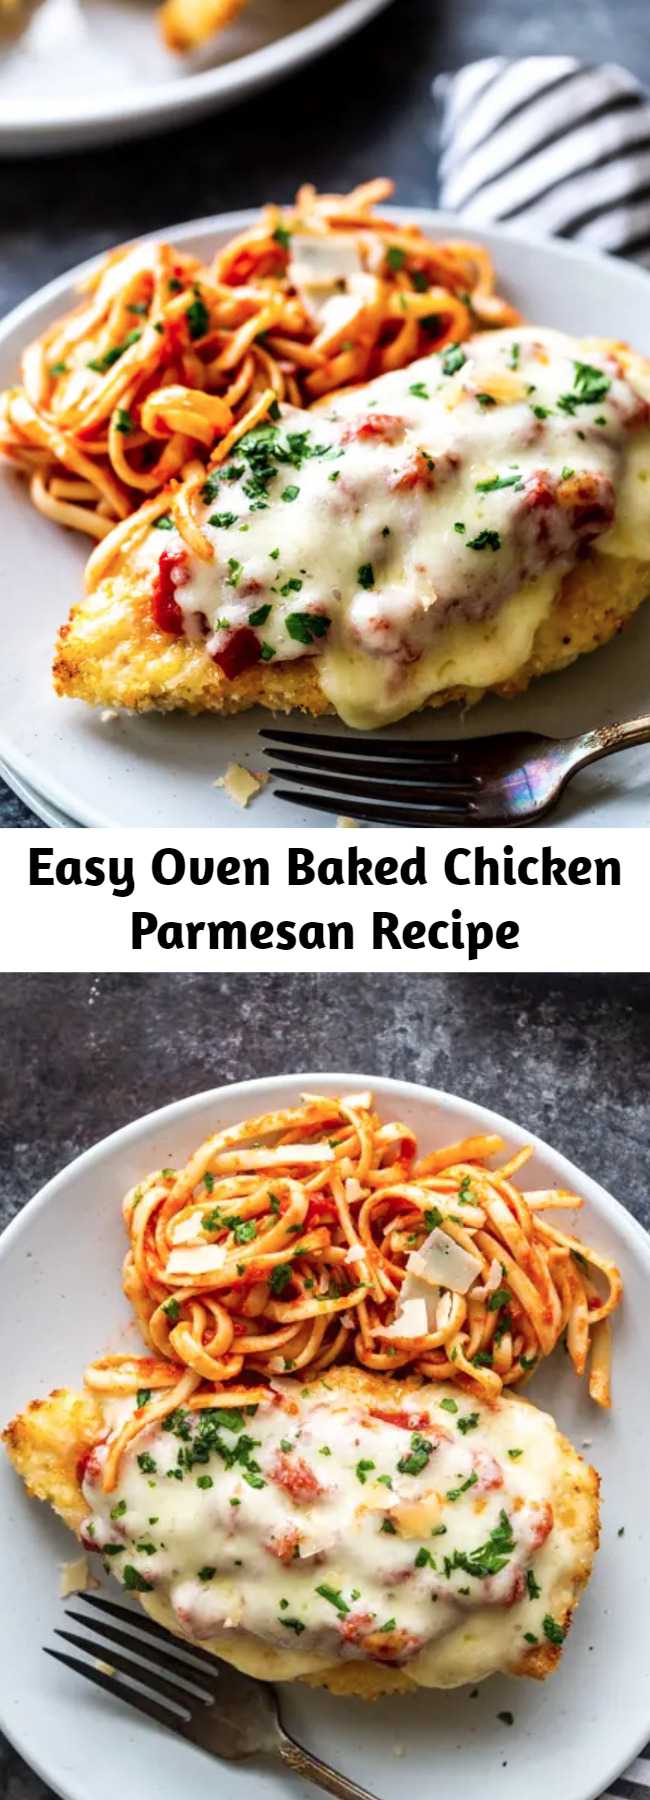 Easy Oven Baked Chicken Parmesan Recipe - This delicious Oven Baked Chicken Parmesan recipe is easy and doesn't require any frying. Because this chicken Parmesan is baked, it is healthy, quick and easy! Make this crispy baked Parmesan crusted chicken for dinner tonight in about thirty minutes!